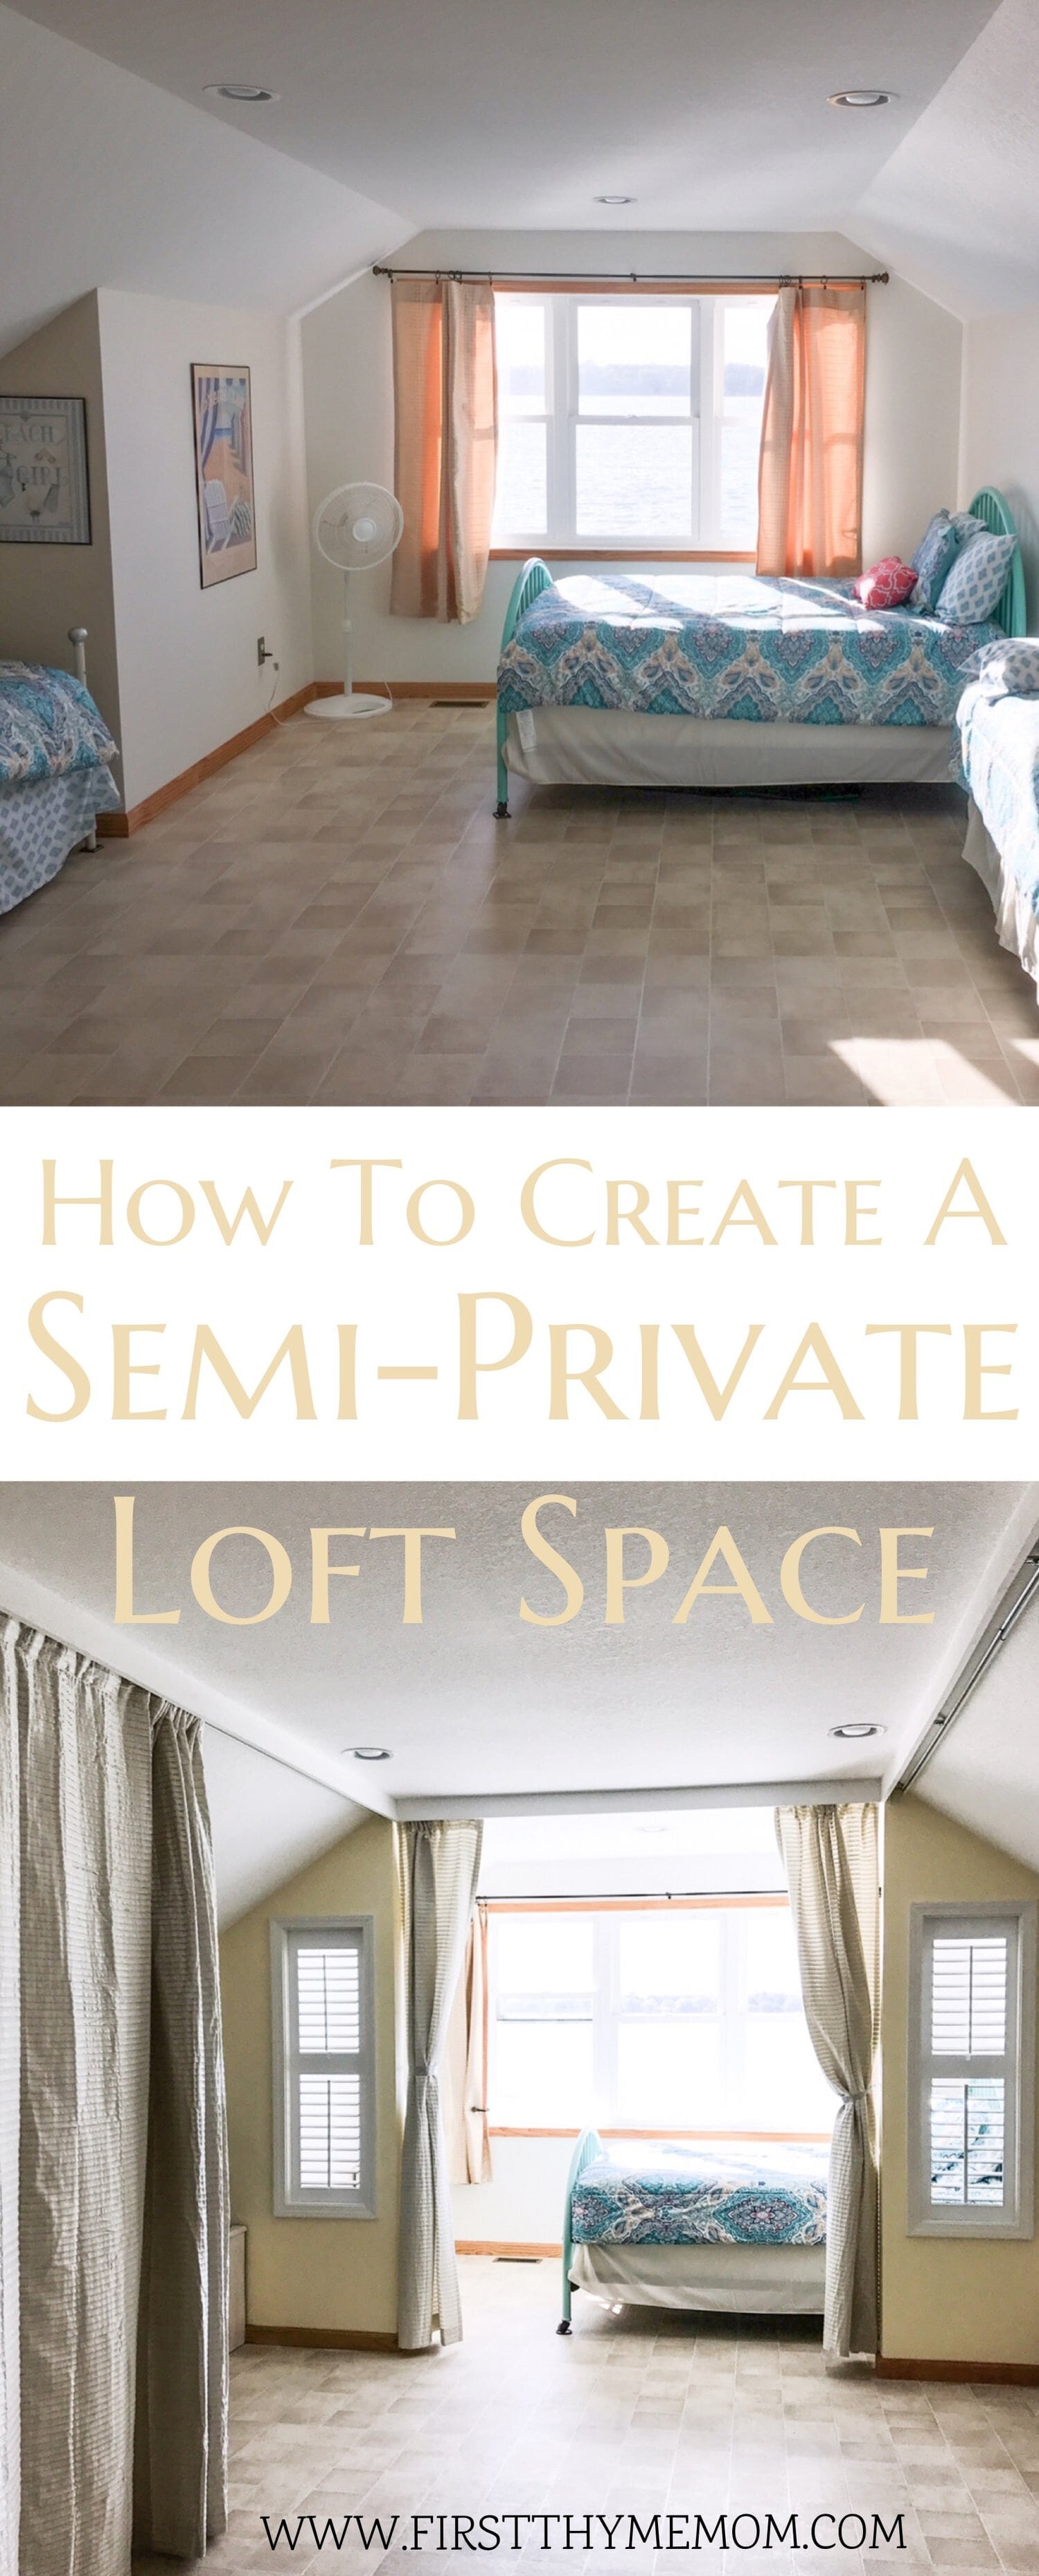 How To Close Off A Loft Space Giving, How To Create Privacy In A Loft Bedroom